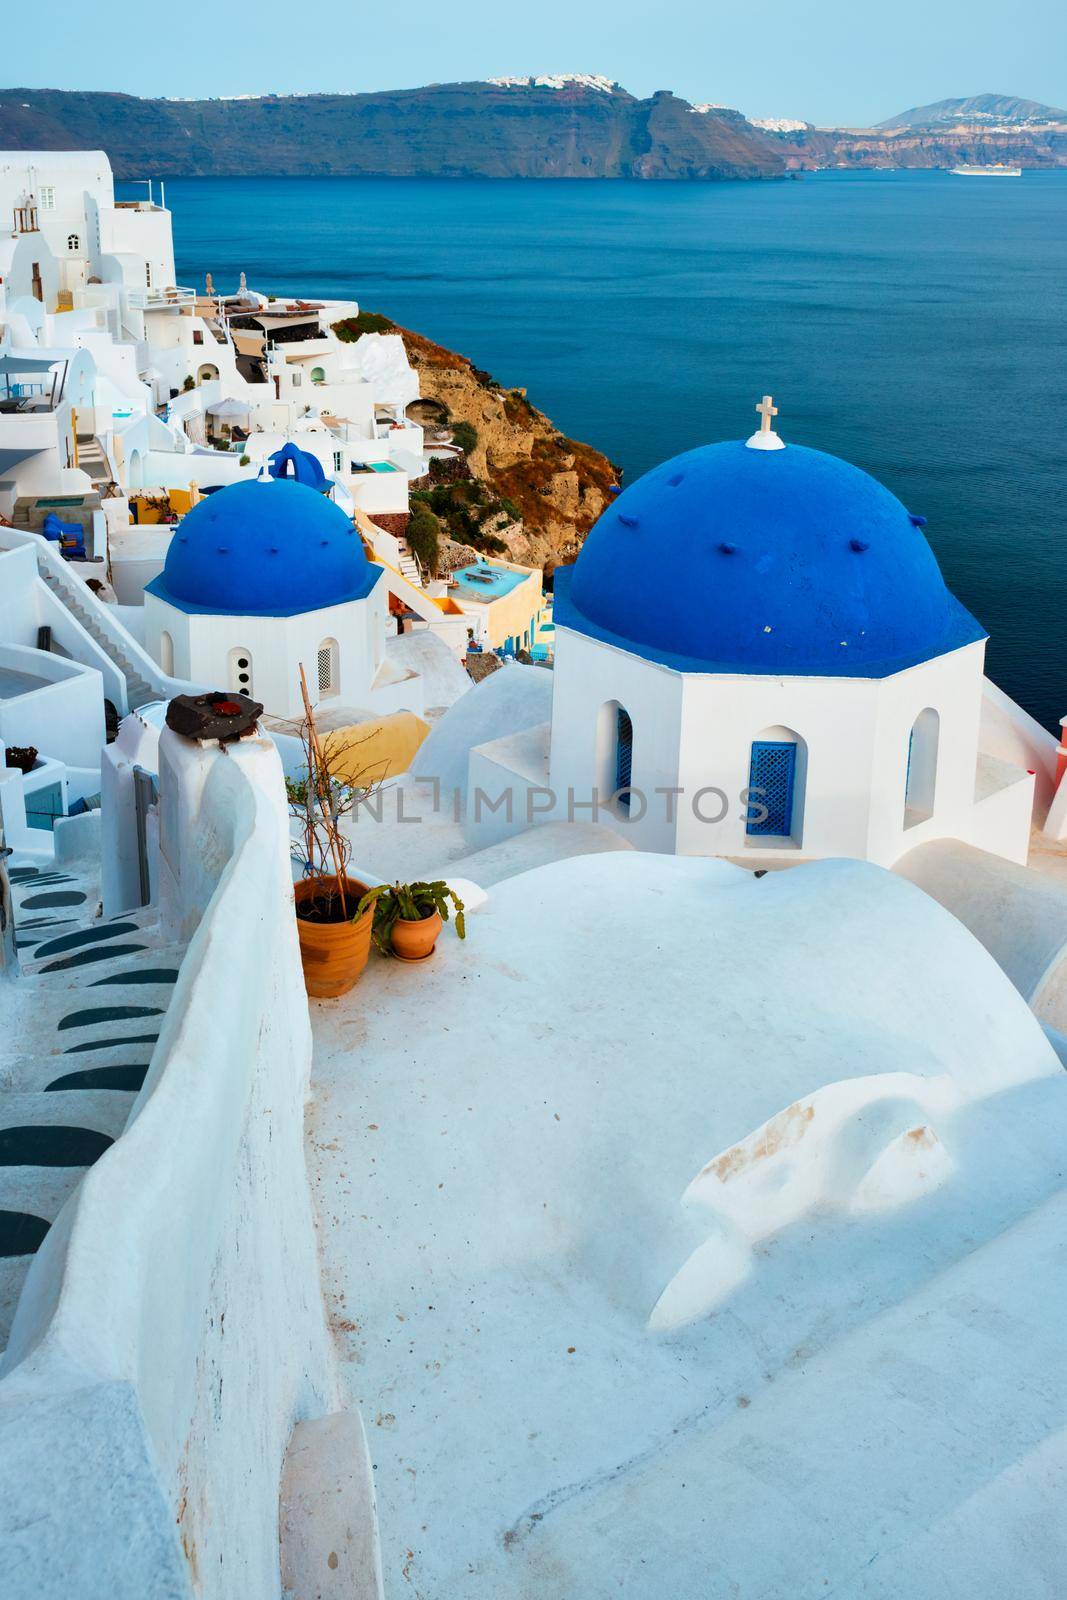 Famous view from viewpoint of Santorini Oia village with blue dome of greek orthodox Christian church by dimol